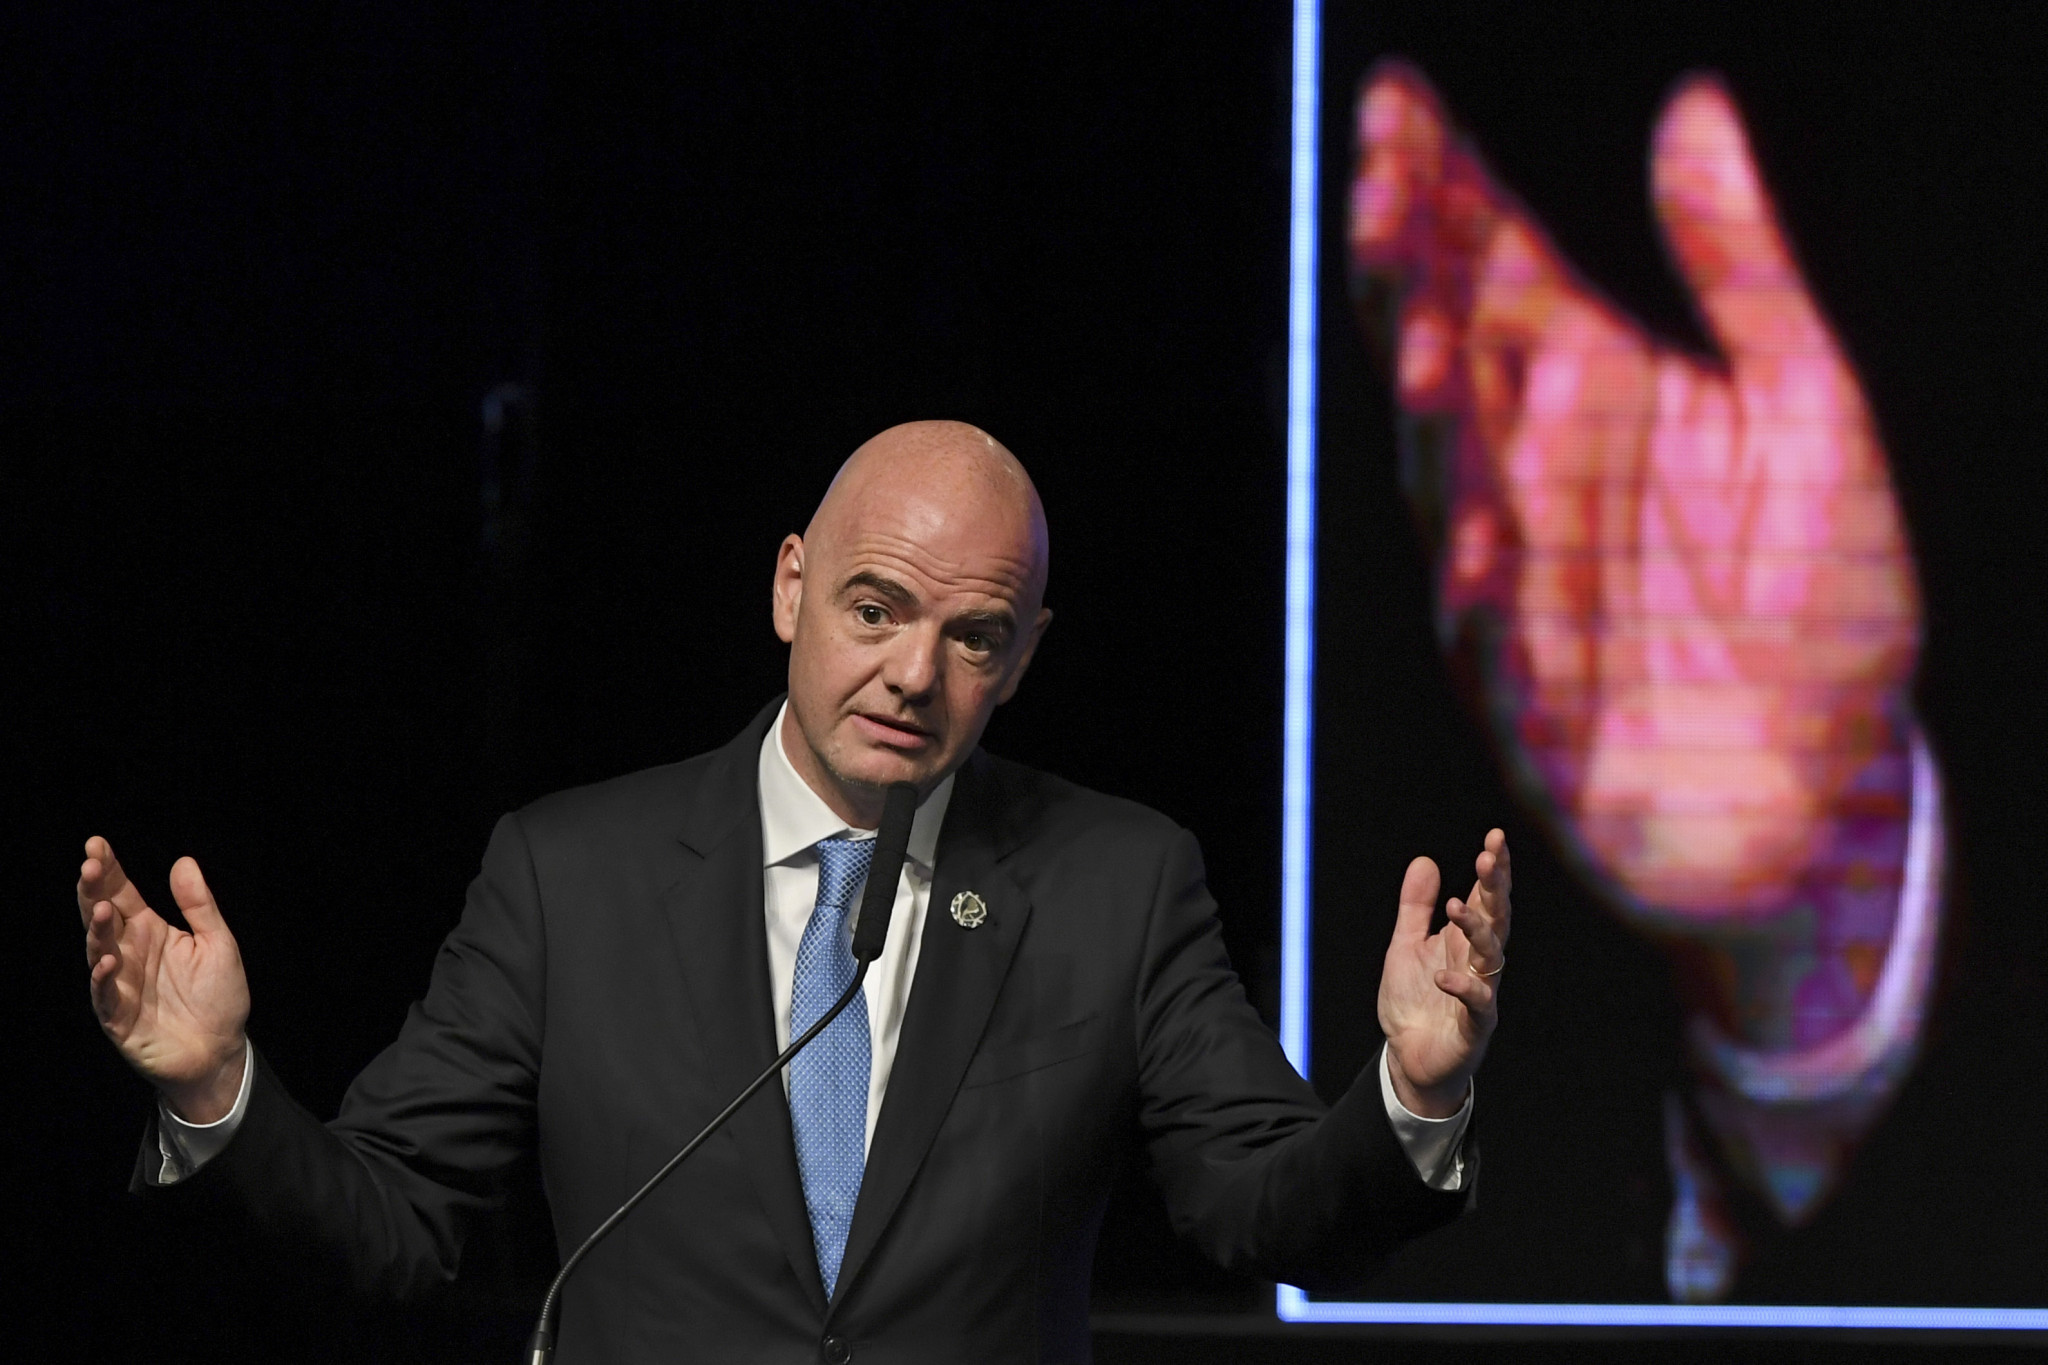 Infantino proposes eight-team World Cup style tournament to conclude planned new Nations League competition